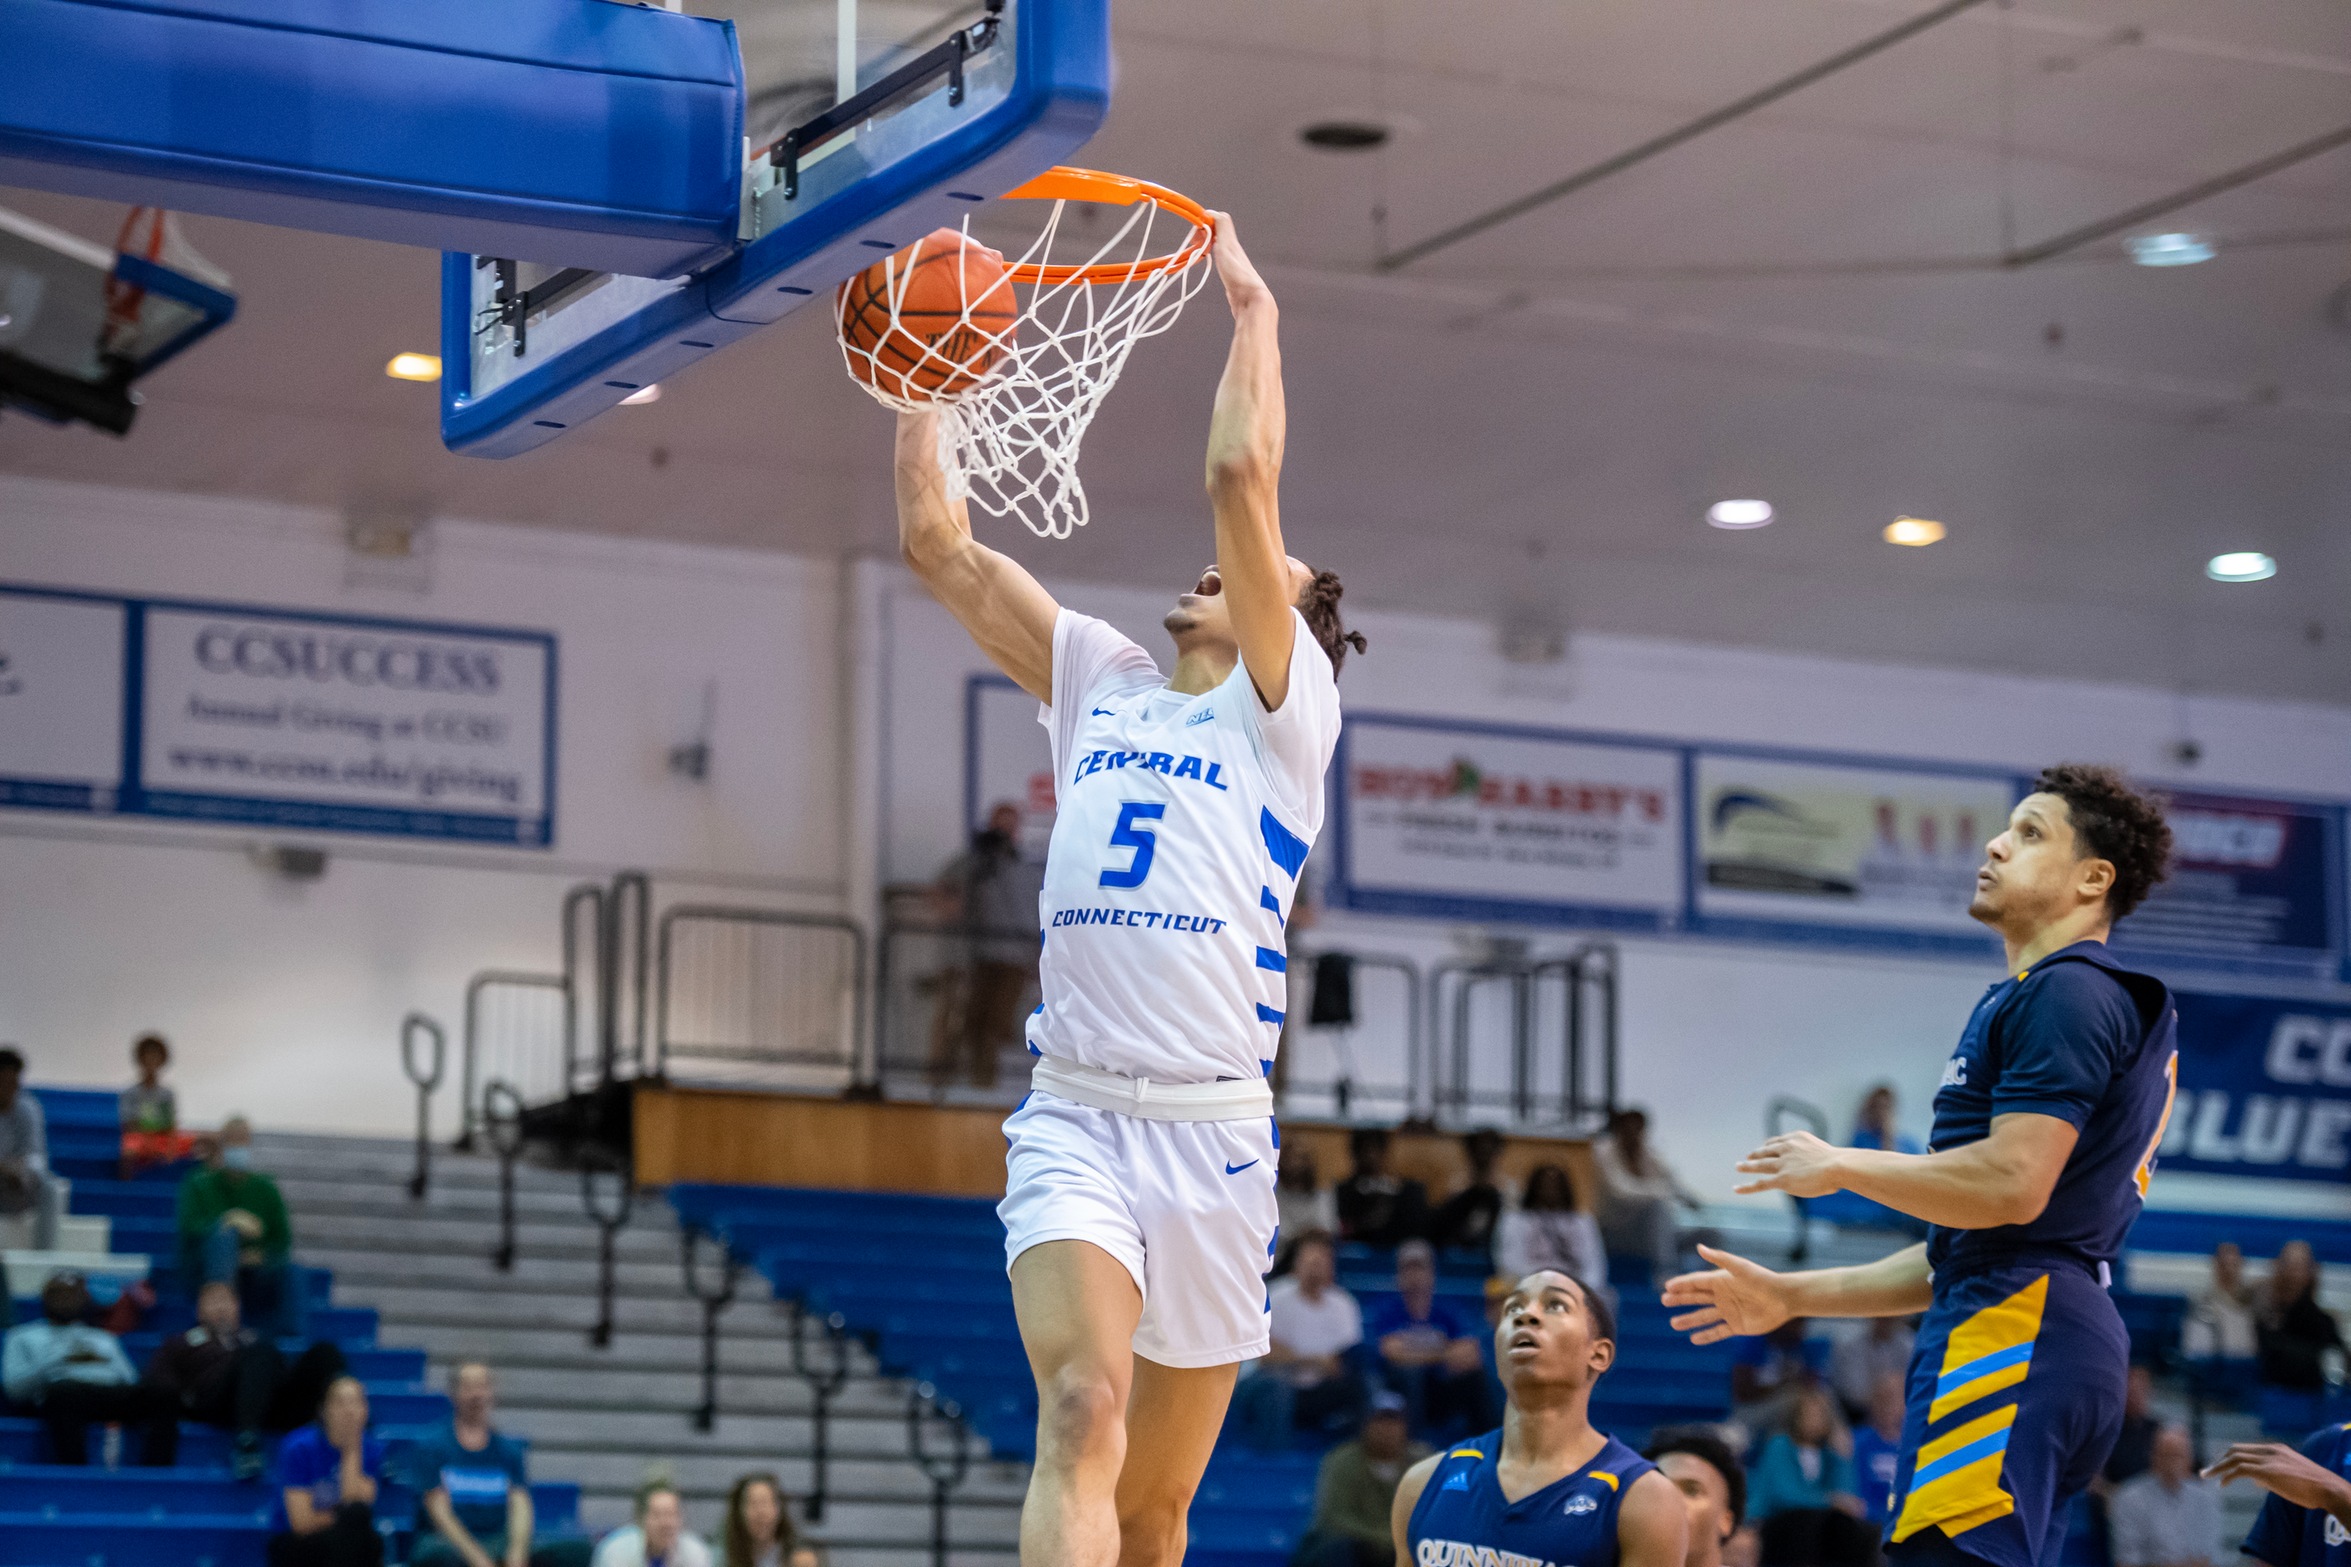 Kellen Amos finished with 11 points in CCSU's win. (Steve McLaughlin photography)